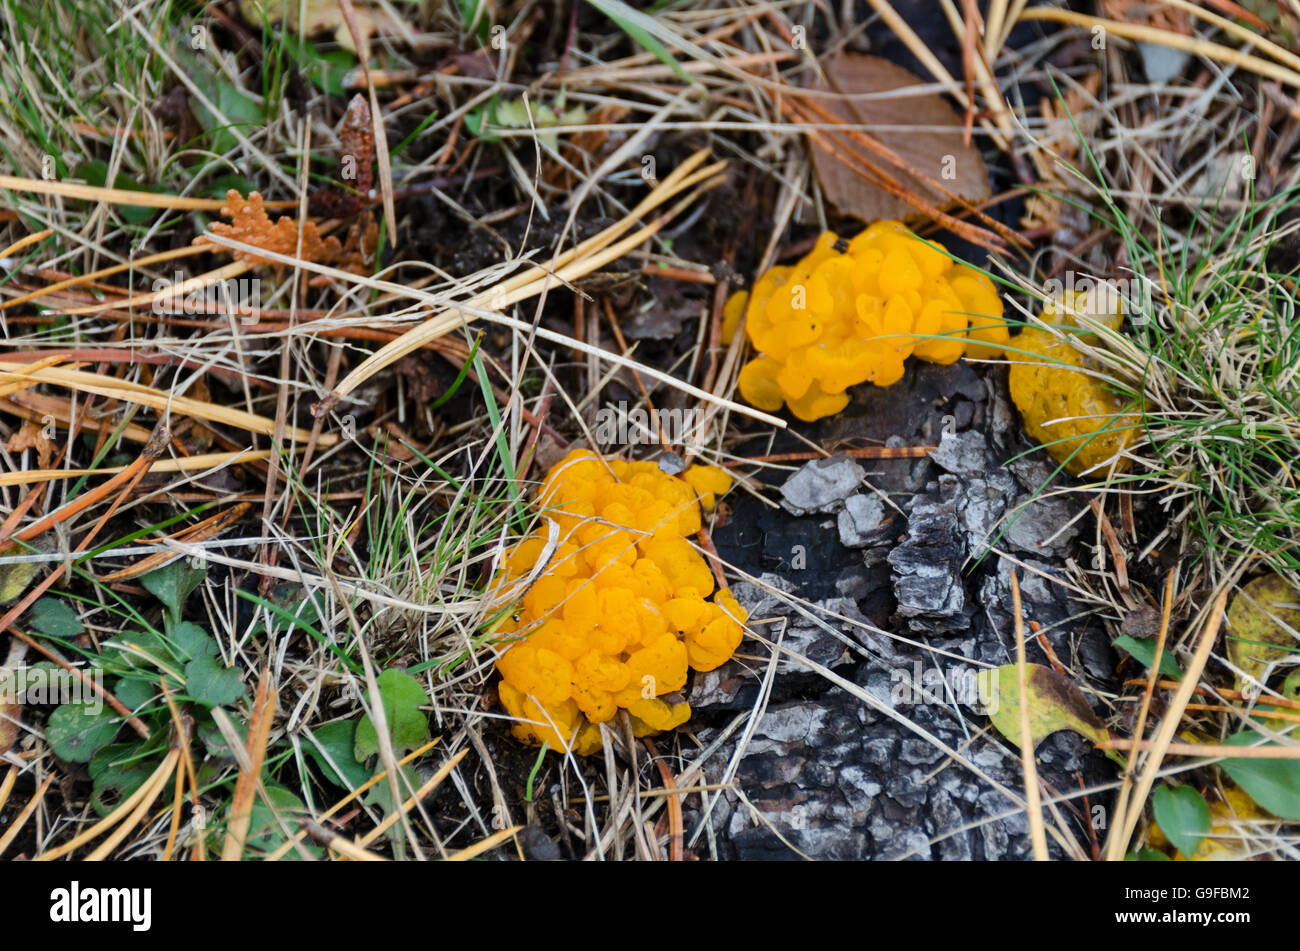 Orange Jelly Fungus (Dacrymyces palmatus) growing on the roots of a Pitch Pine (Pinus rigida) in Seal Harbor, Maine. Stock Photo